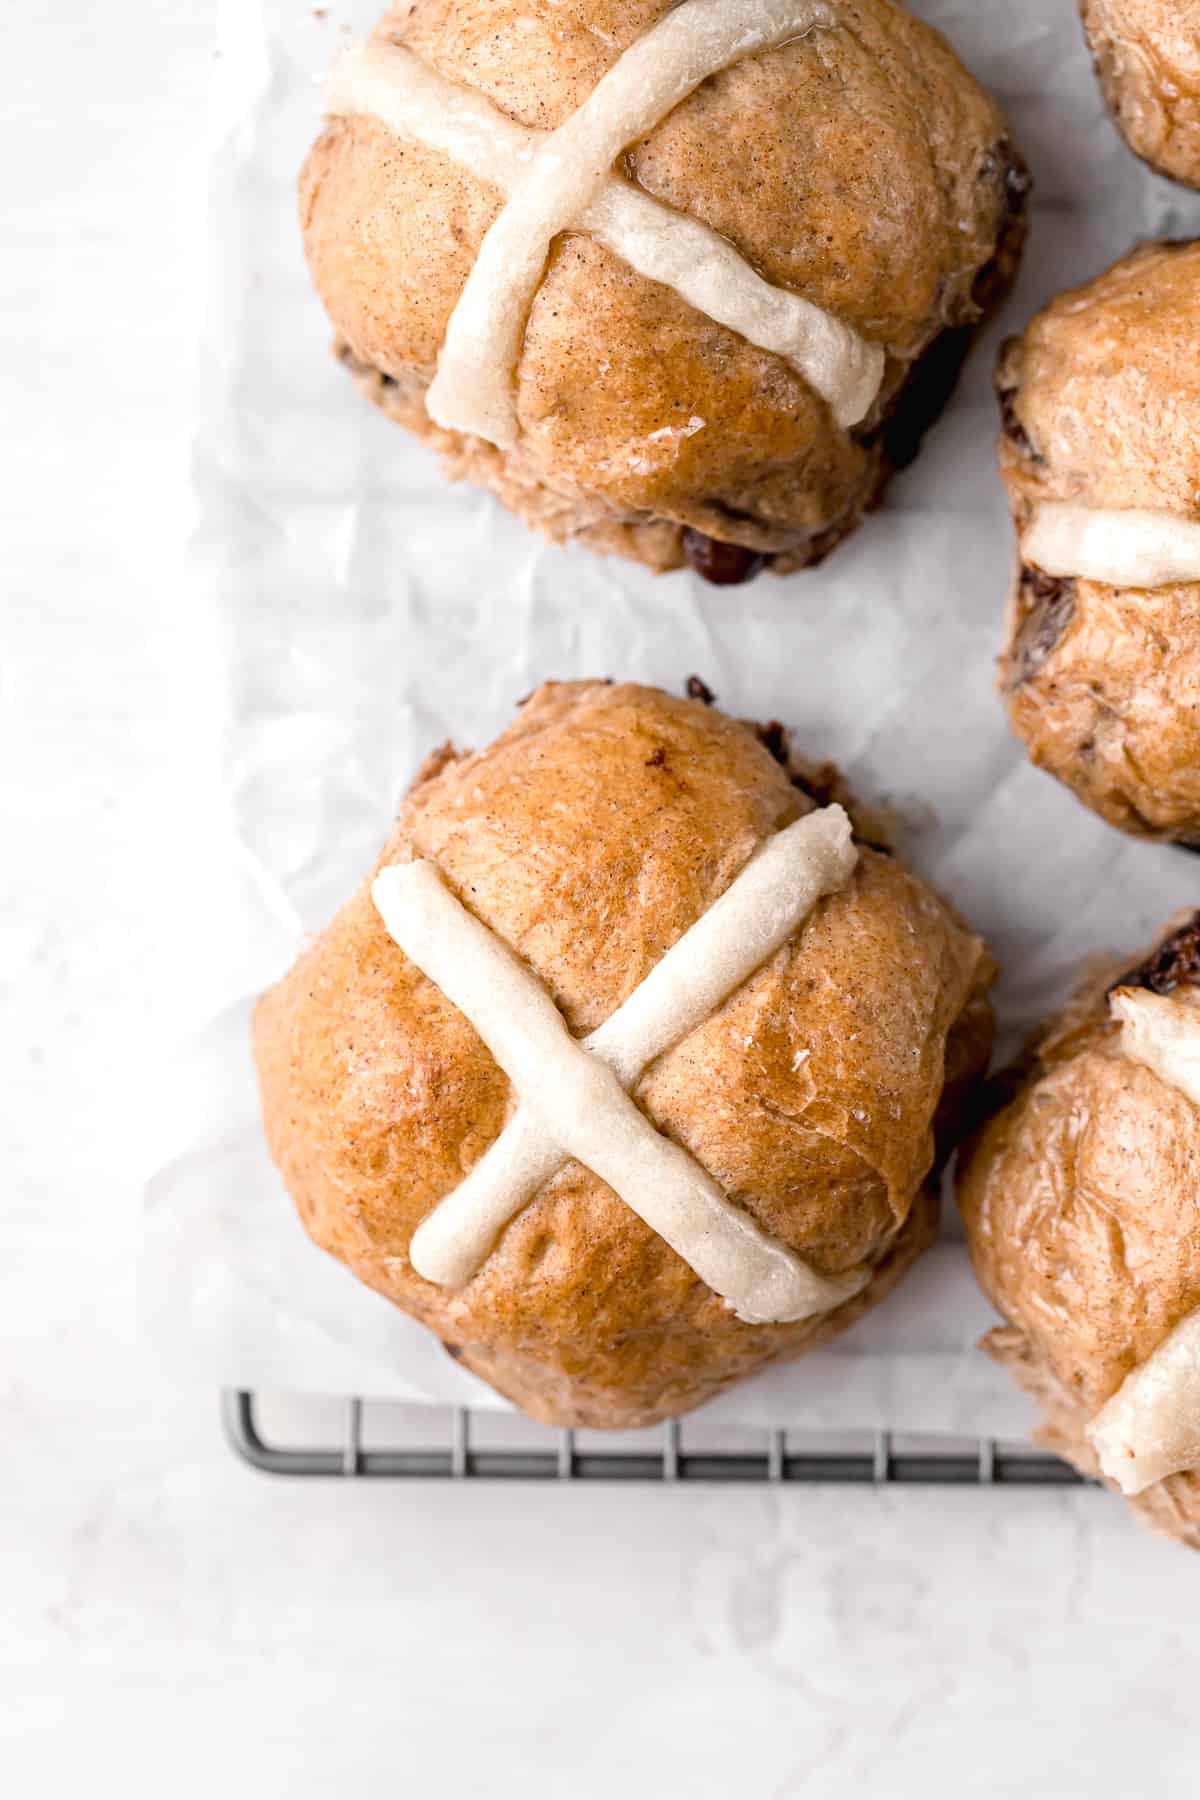 hot cross buns on parchment lined wire rack.